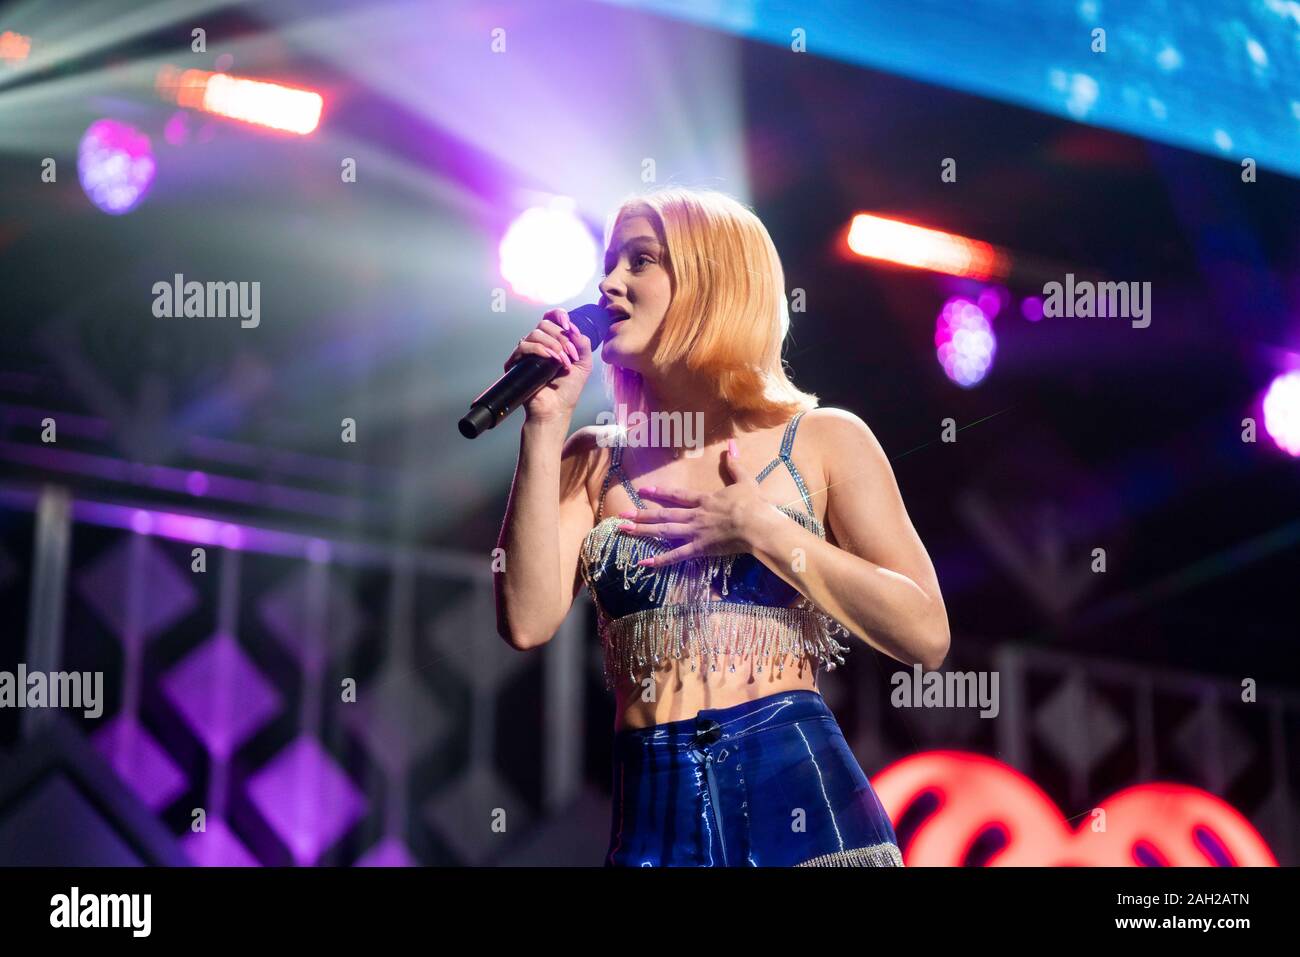 Sunrise, United States. 22nd Dec, 2019. Zara Larsson performs during the  Y100 Jingle Ball at the